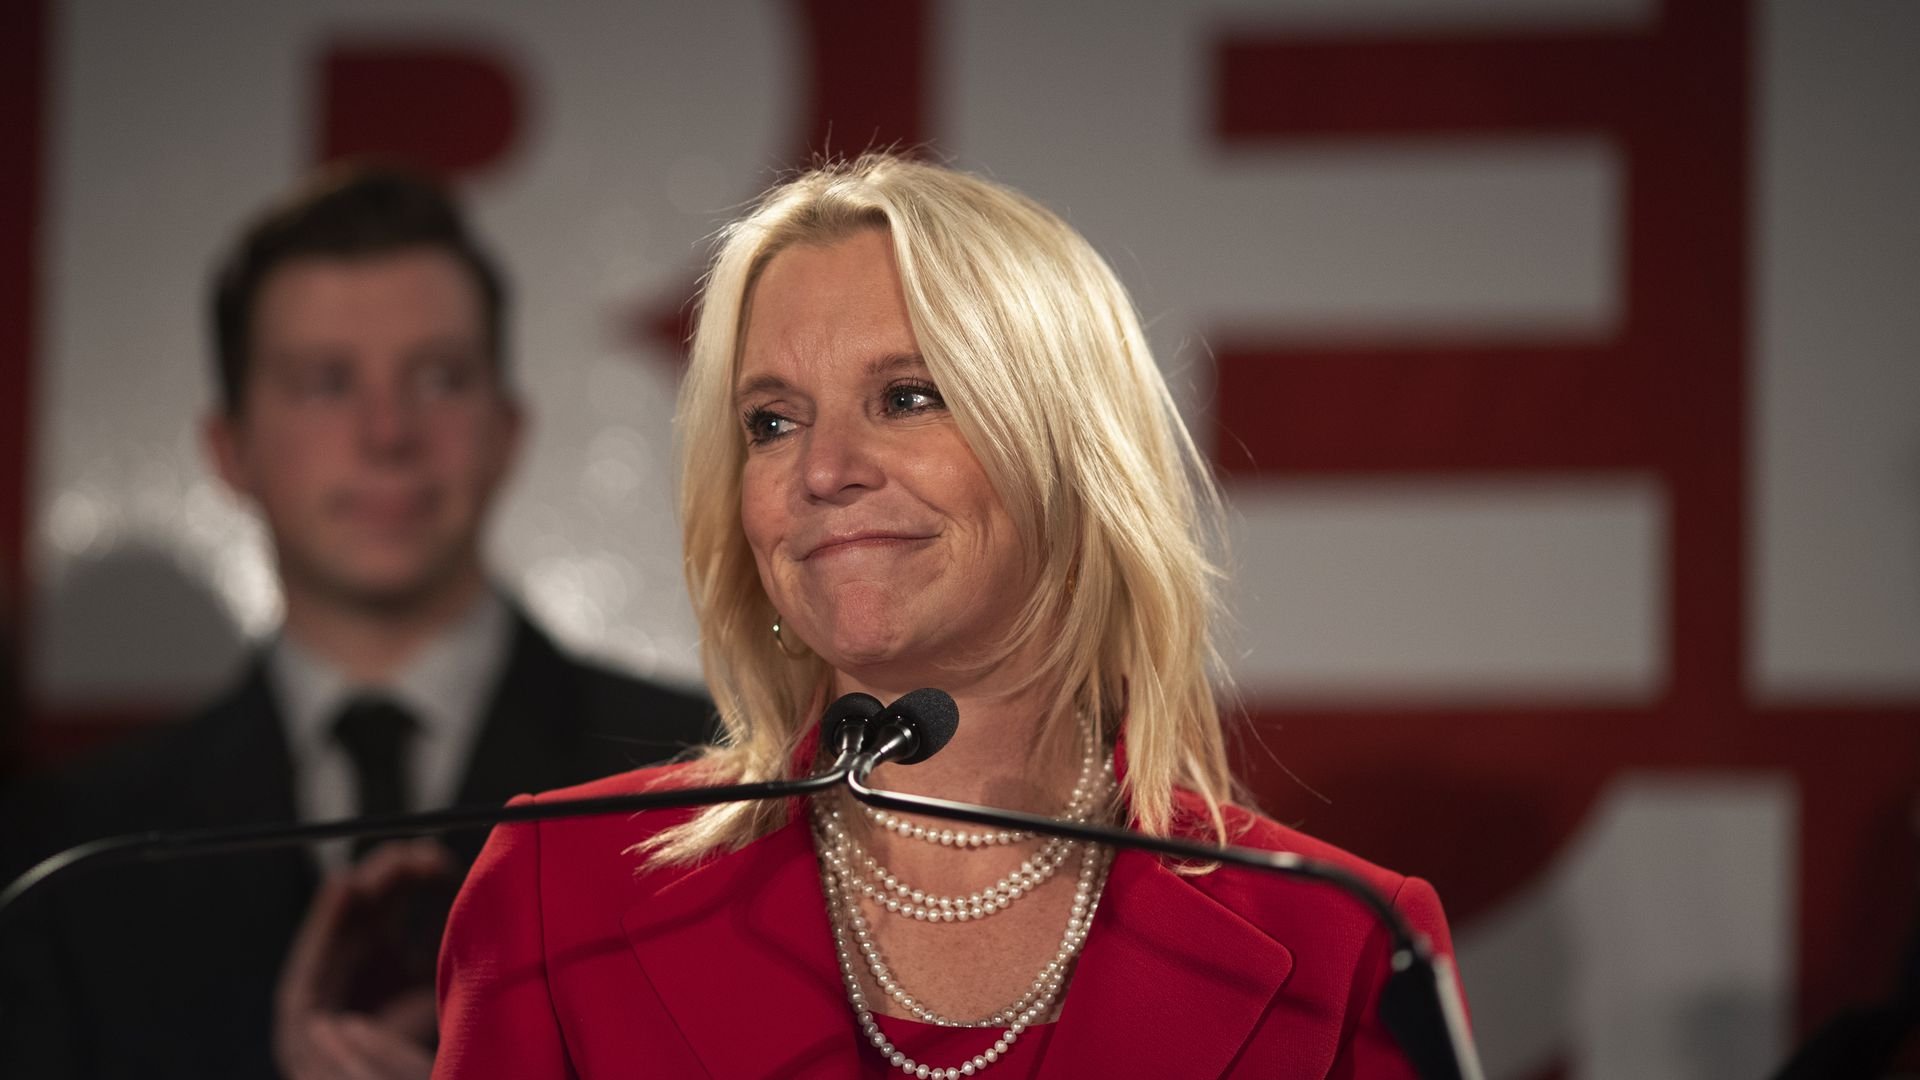 Scoop: Karin Housley weighing run for Minnesota governor